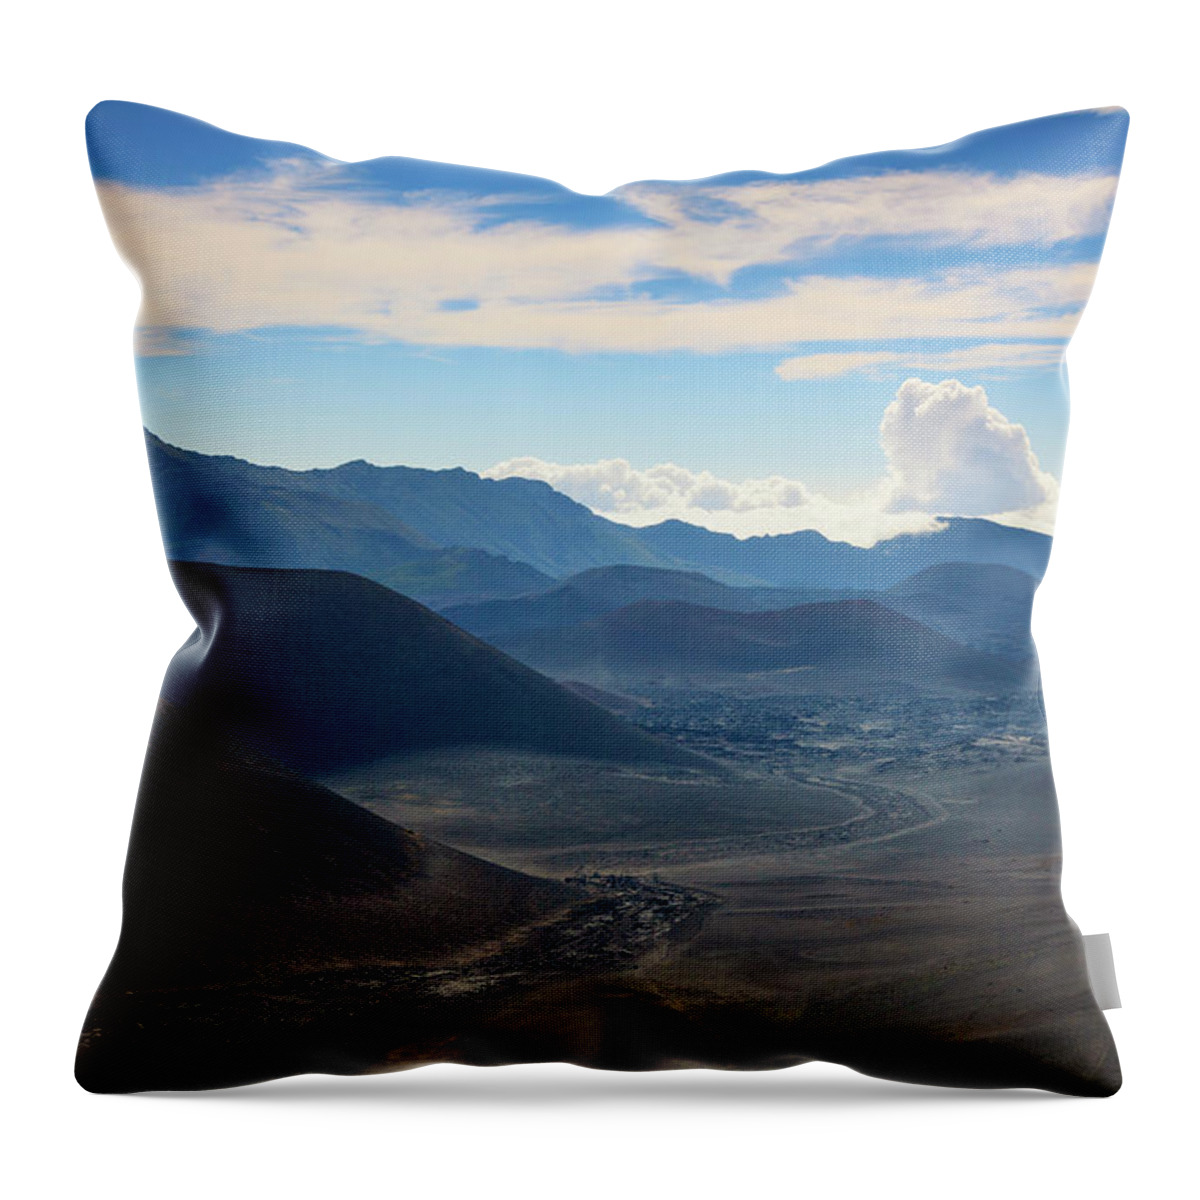 Tranquility Throw Pillow featuring the photograph Usa, Hawaii, Maui, Haleaka National Park by Michele Falzone